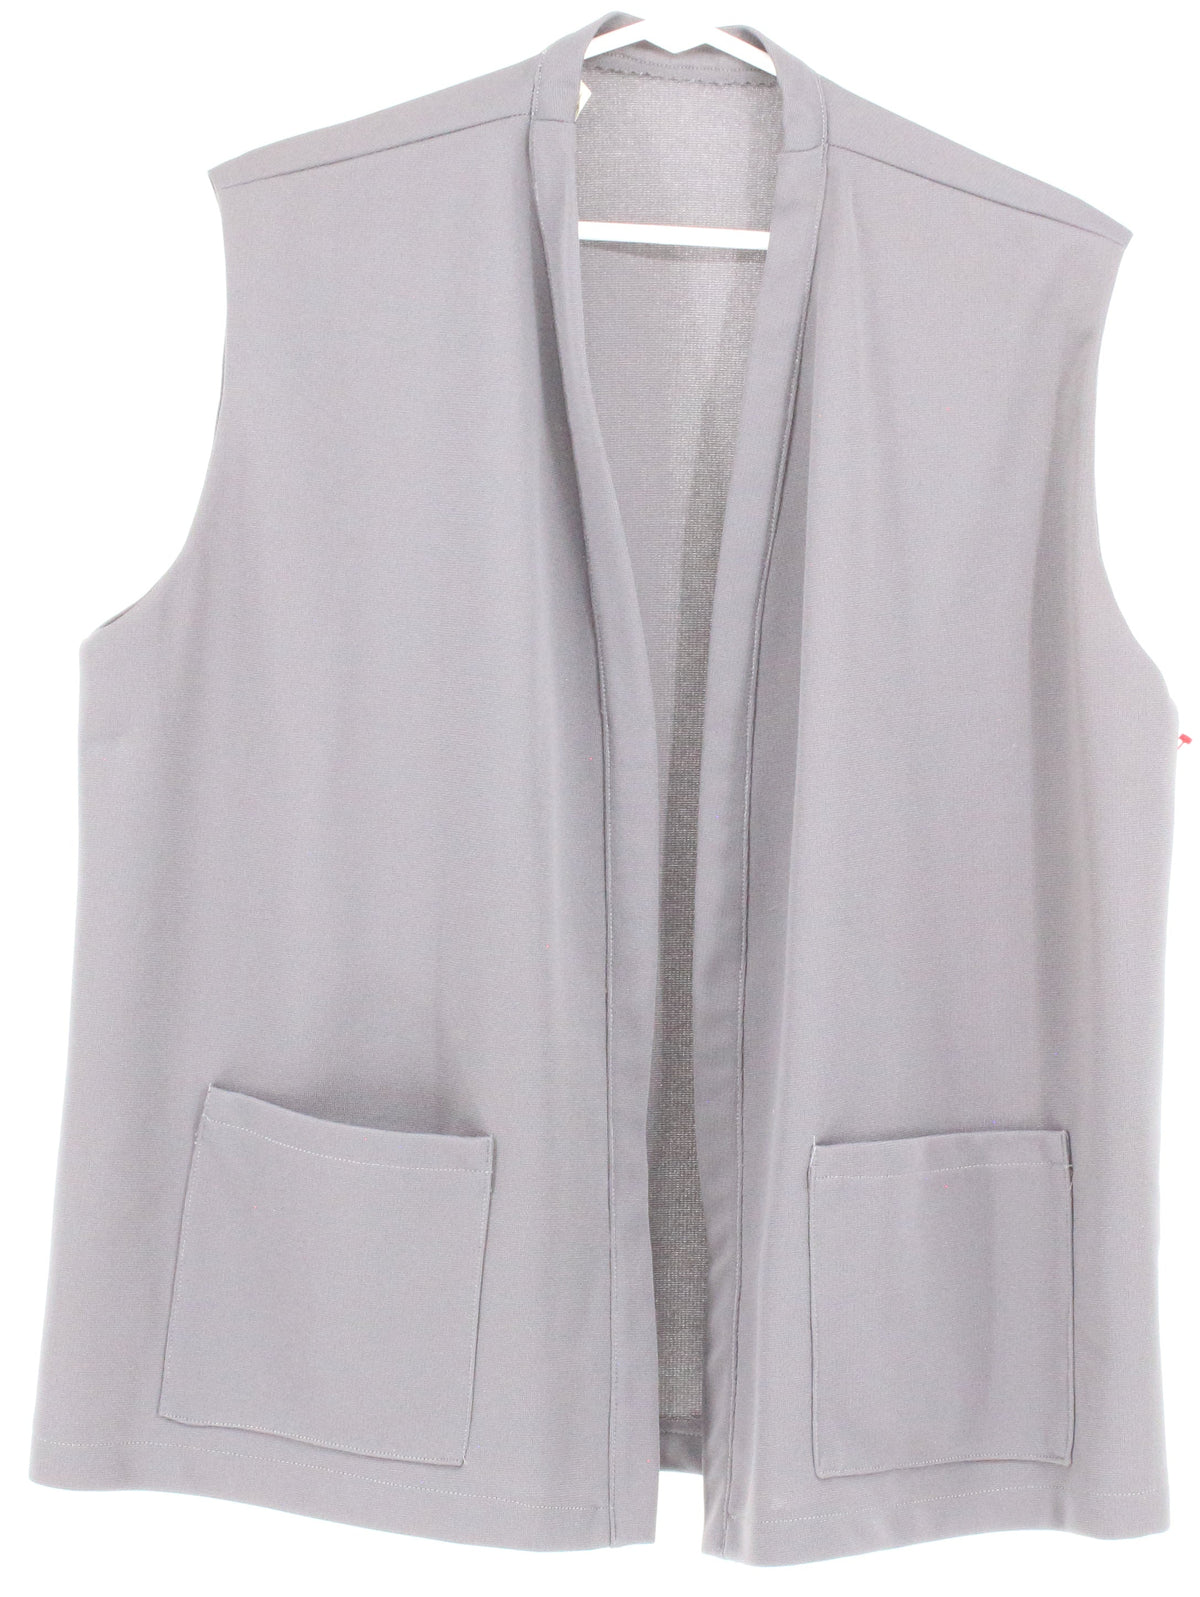 Made Especially For You By Angie Koss Grey Sleeveless Open Front Shrug